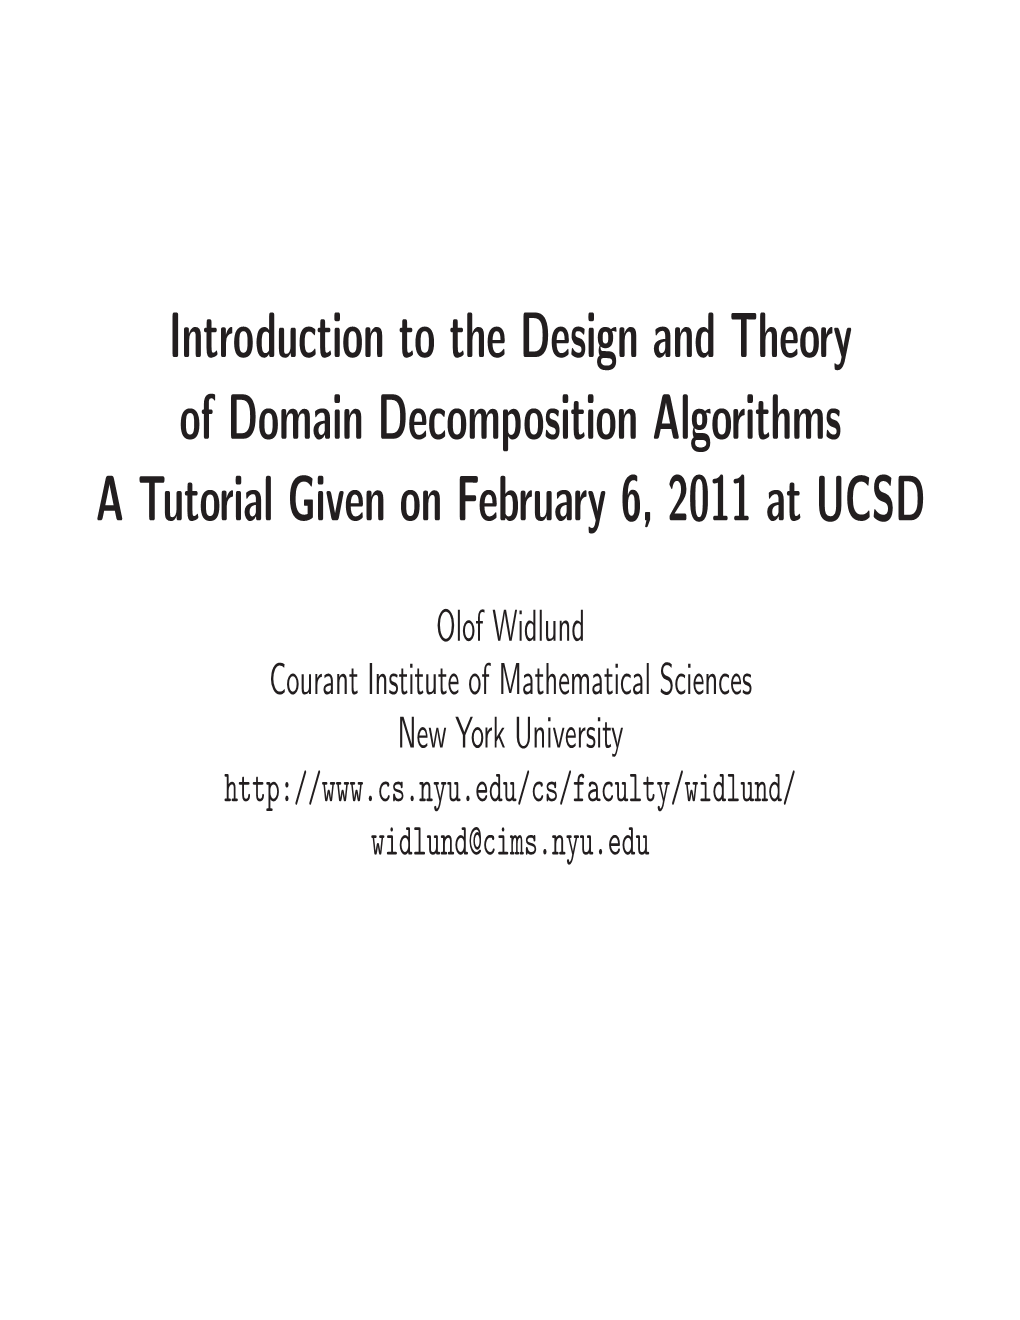 Introduction to the Design and Theory of Domain Decomposition Algorithms a Tutorial Given on February 6, 2011 at UCSD